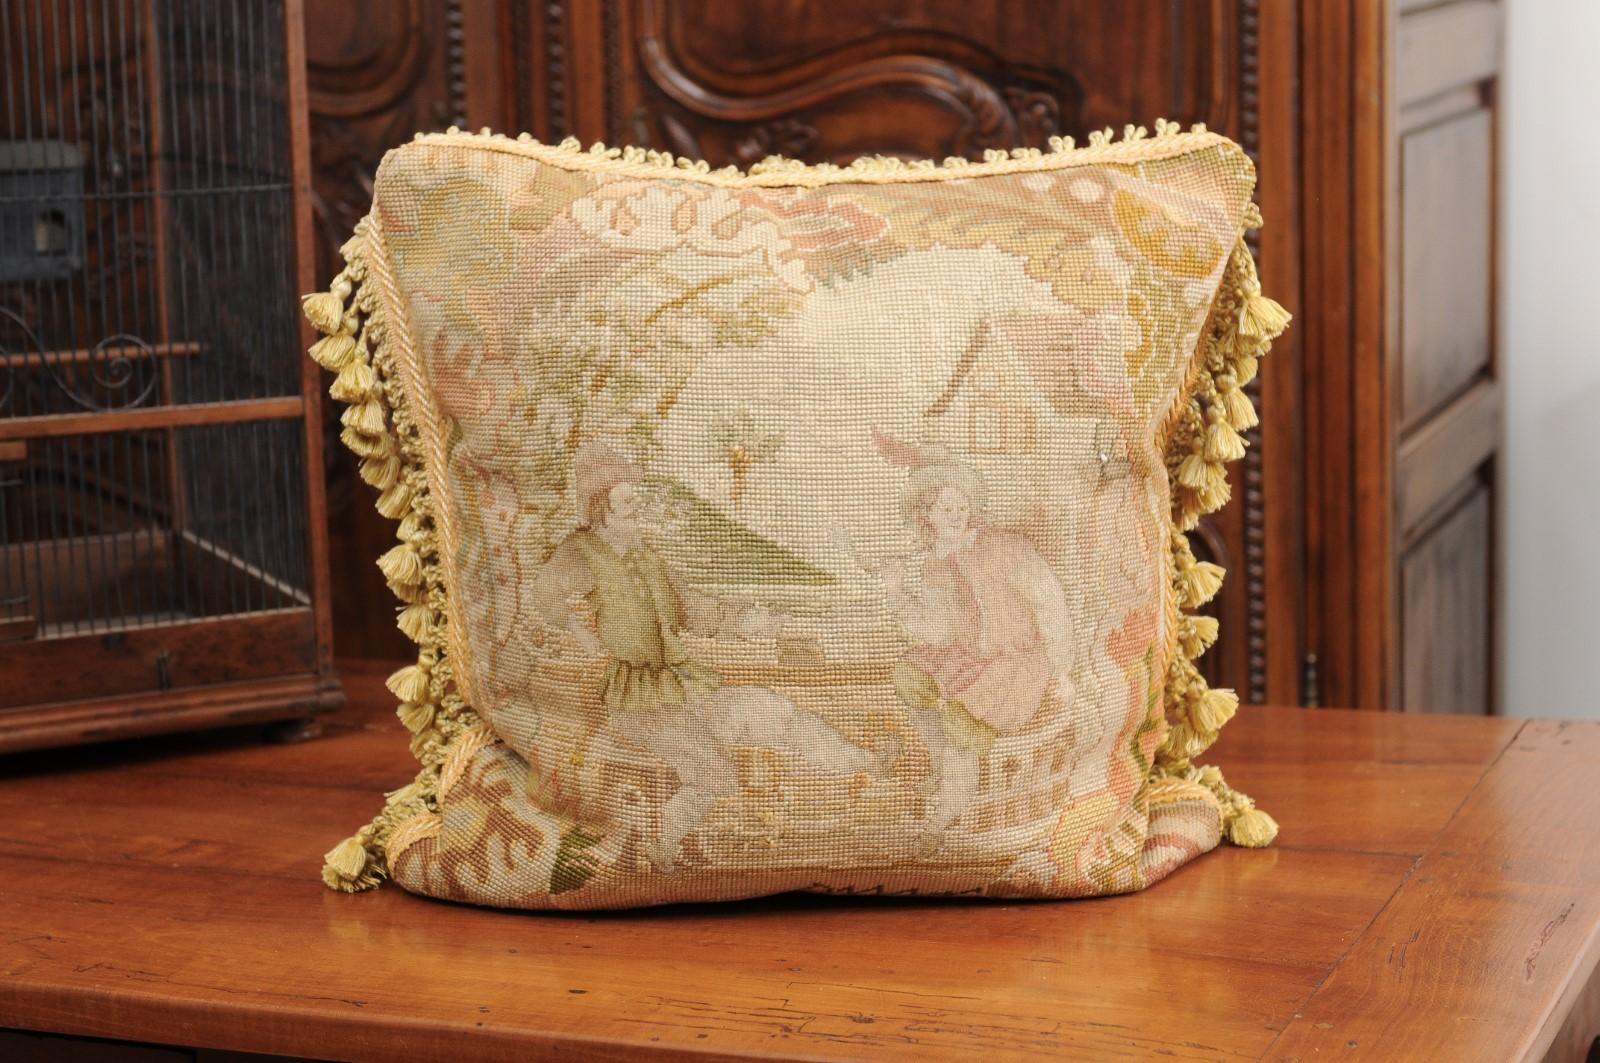 A French Aubusson tapestry pillow from the 19th century, with medieval style genre scene and tassels. Woven during the 19th century in the Aubusson tapestry manufacture located in central France, this exquisite pillow features a joyous scene